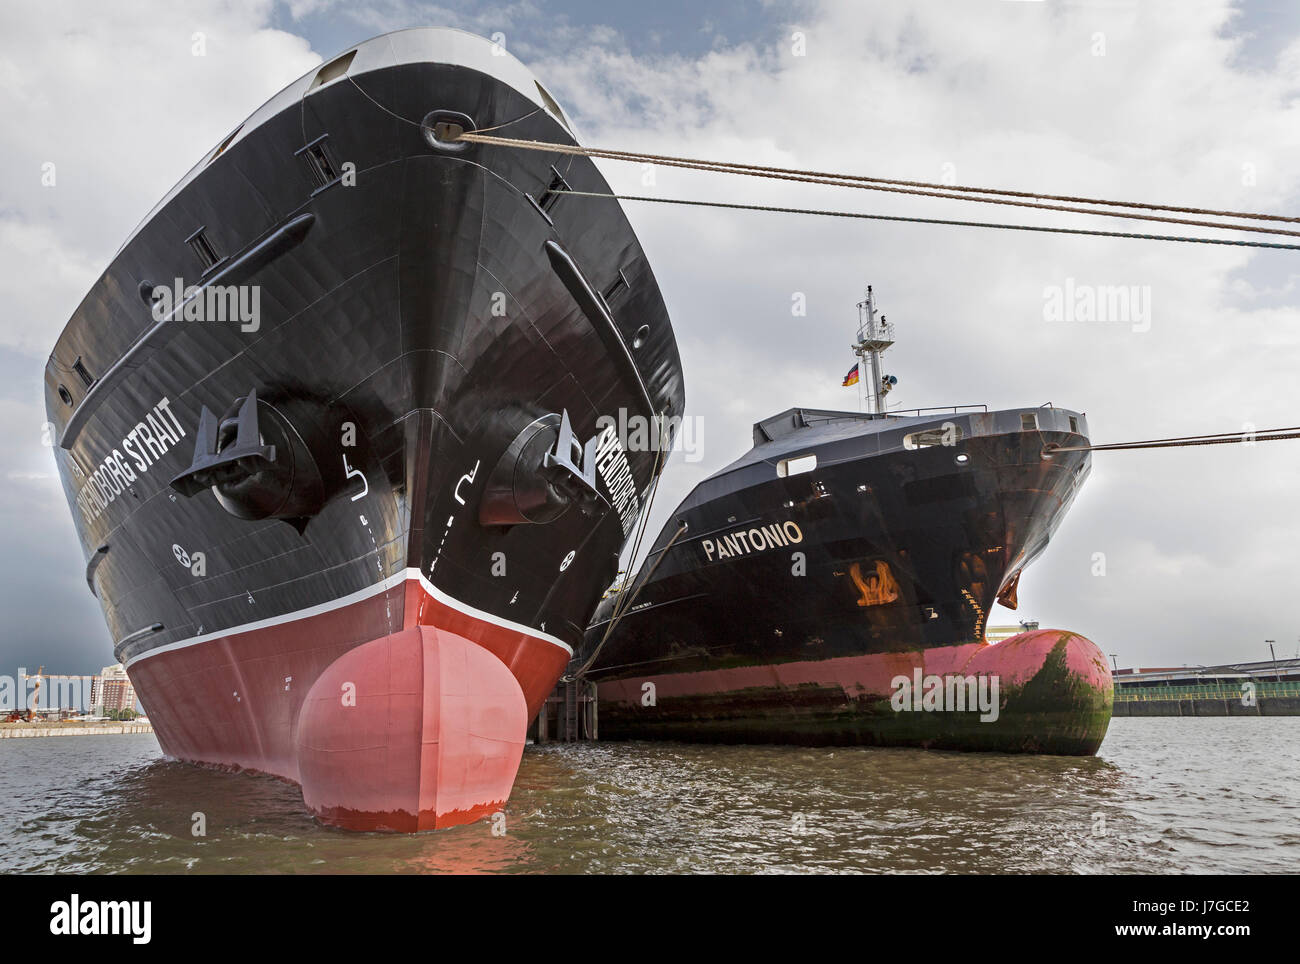 Ships in the habor on roadstead, Germany, in the Norderelbe, Hamburg, Germany Stock Photo